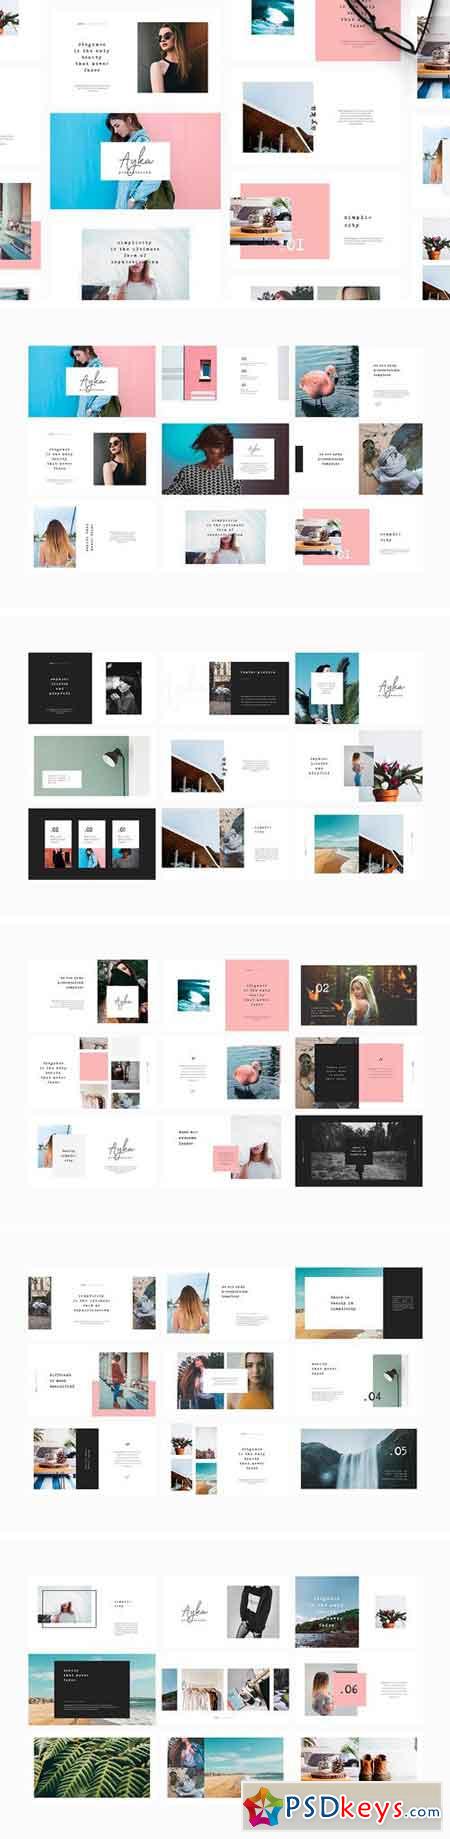 PowerPoint » page 10 » Free Download Photoshop Vector Stock image Via ...